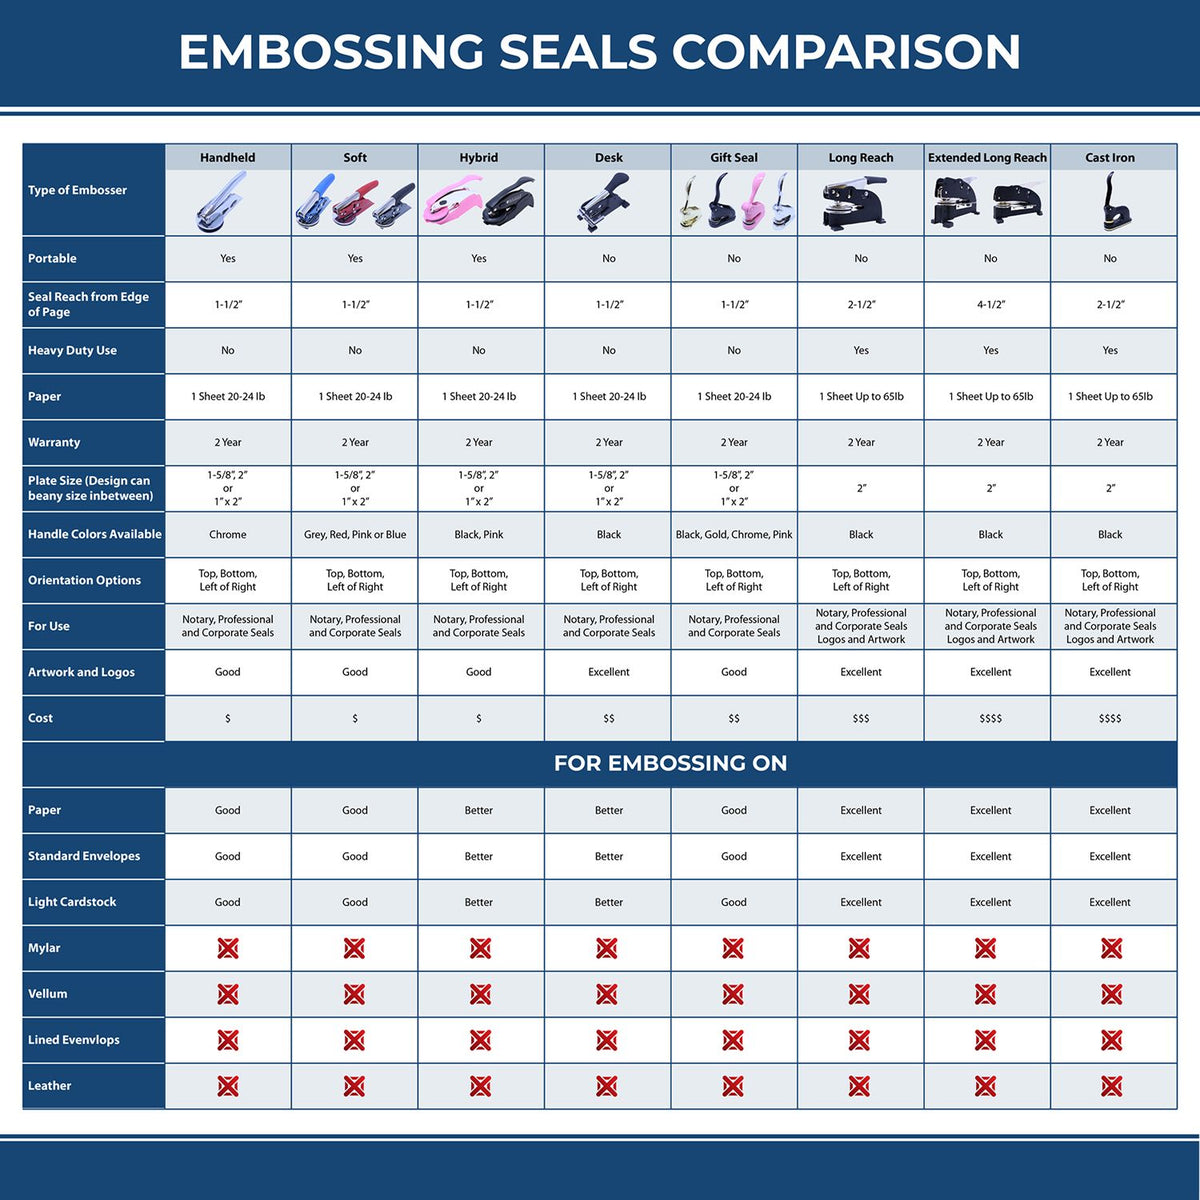 A comparison chart for the different types of mount models available for the Hybrid Delaware Land Surveyor Seal